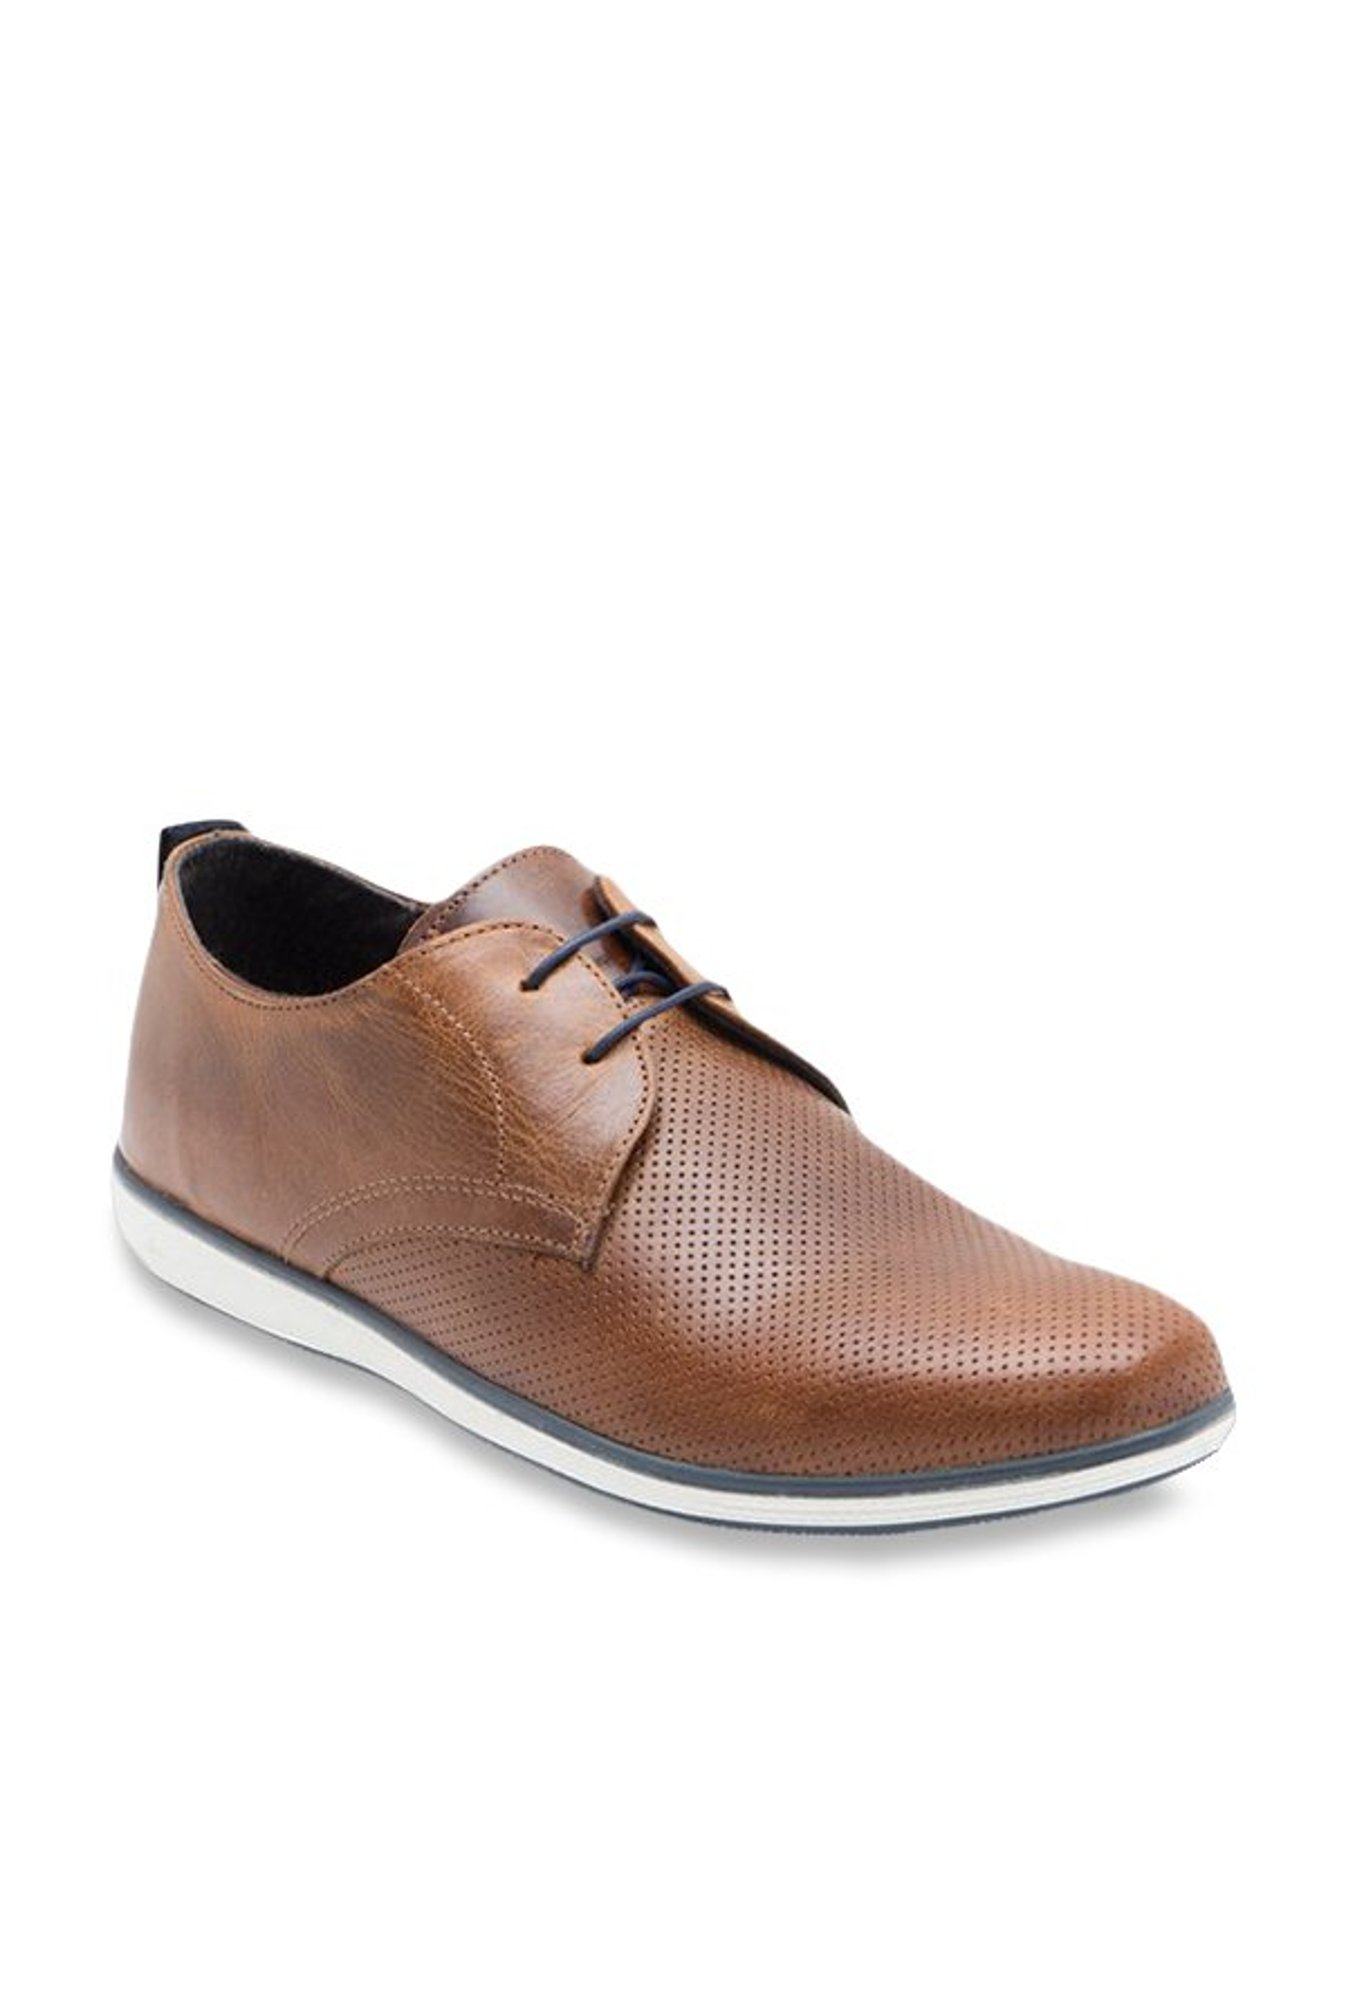 Buy Red Tape Dark Tan Derby Shoes for 